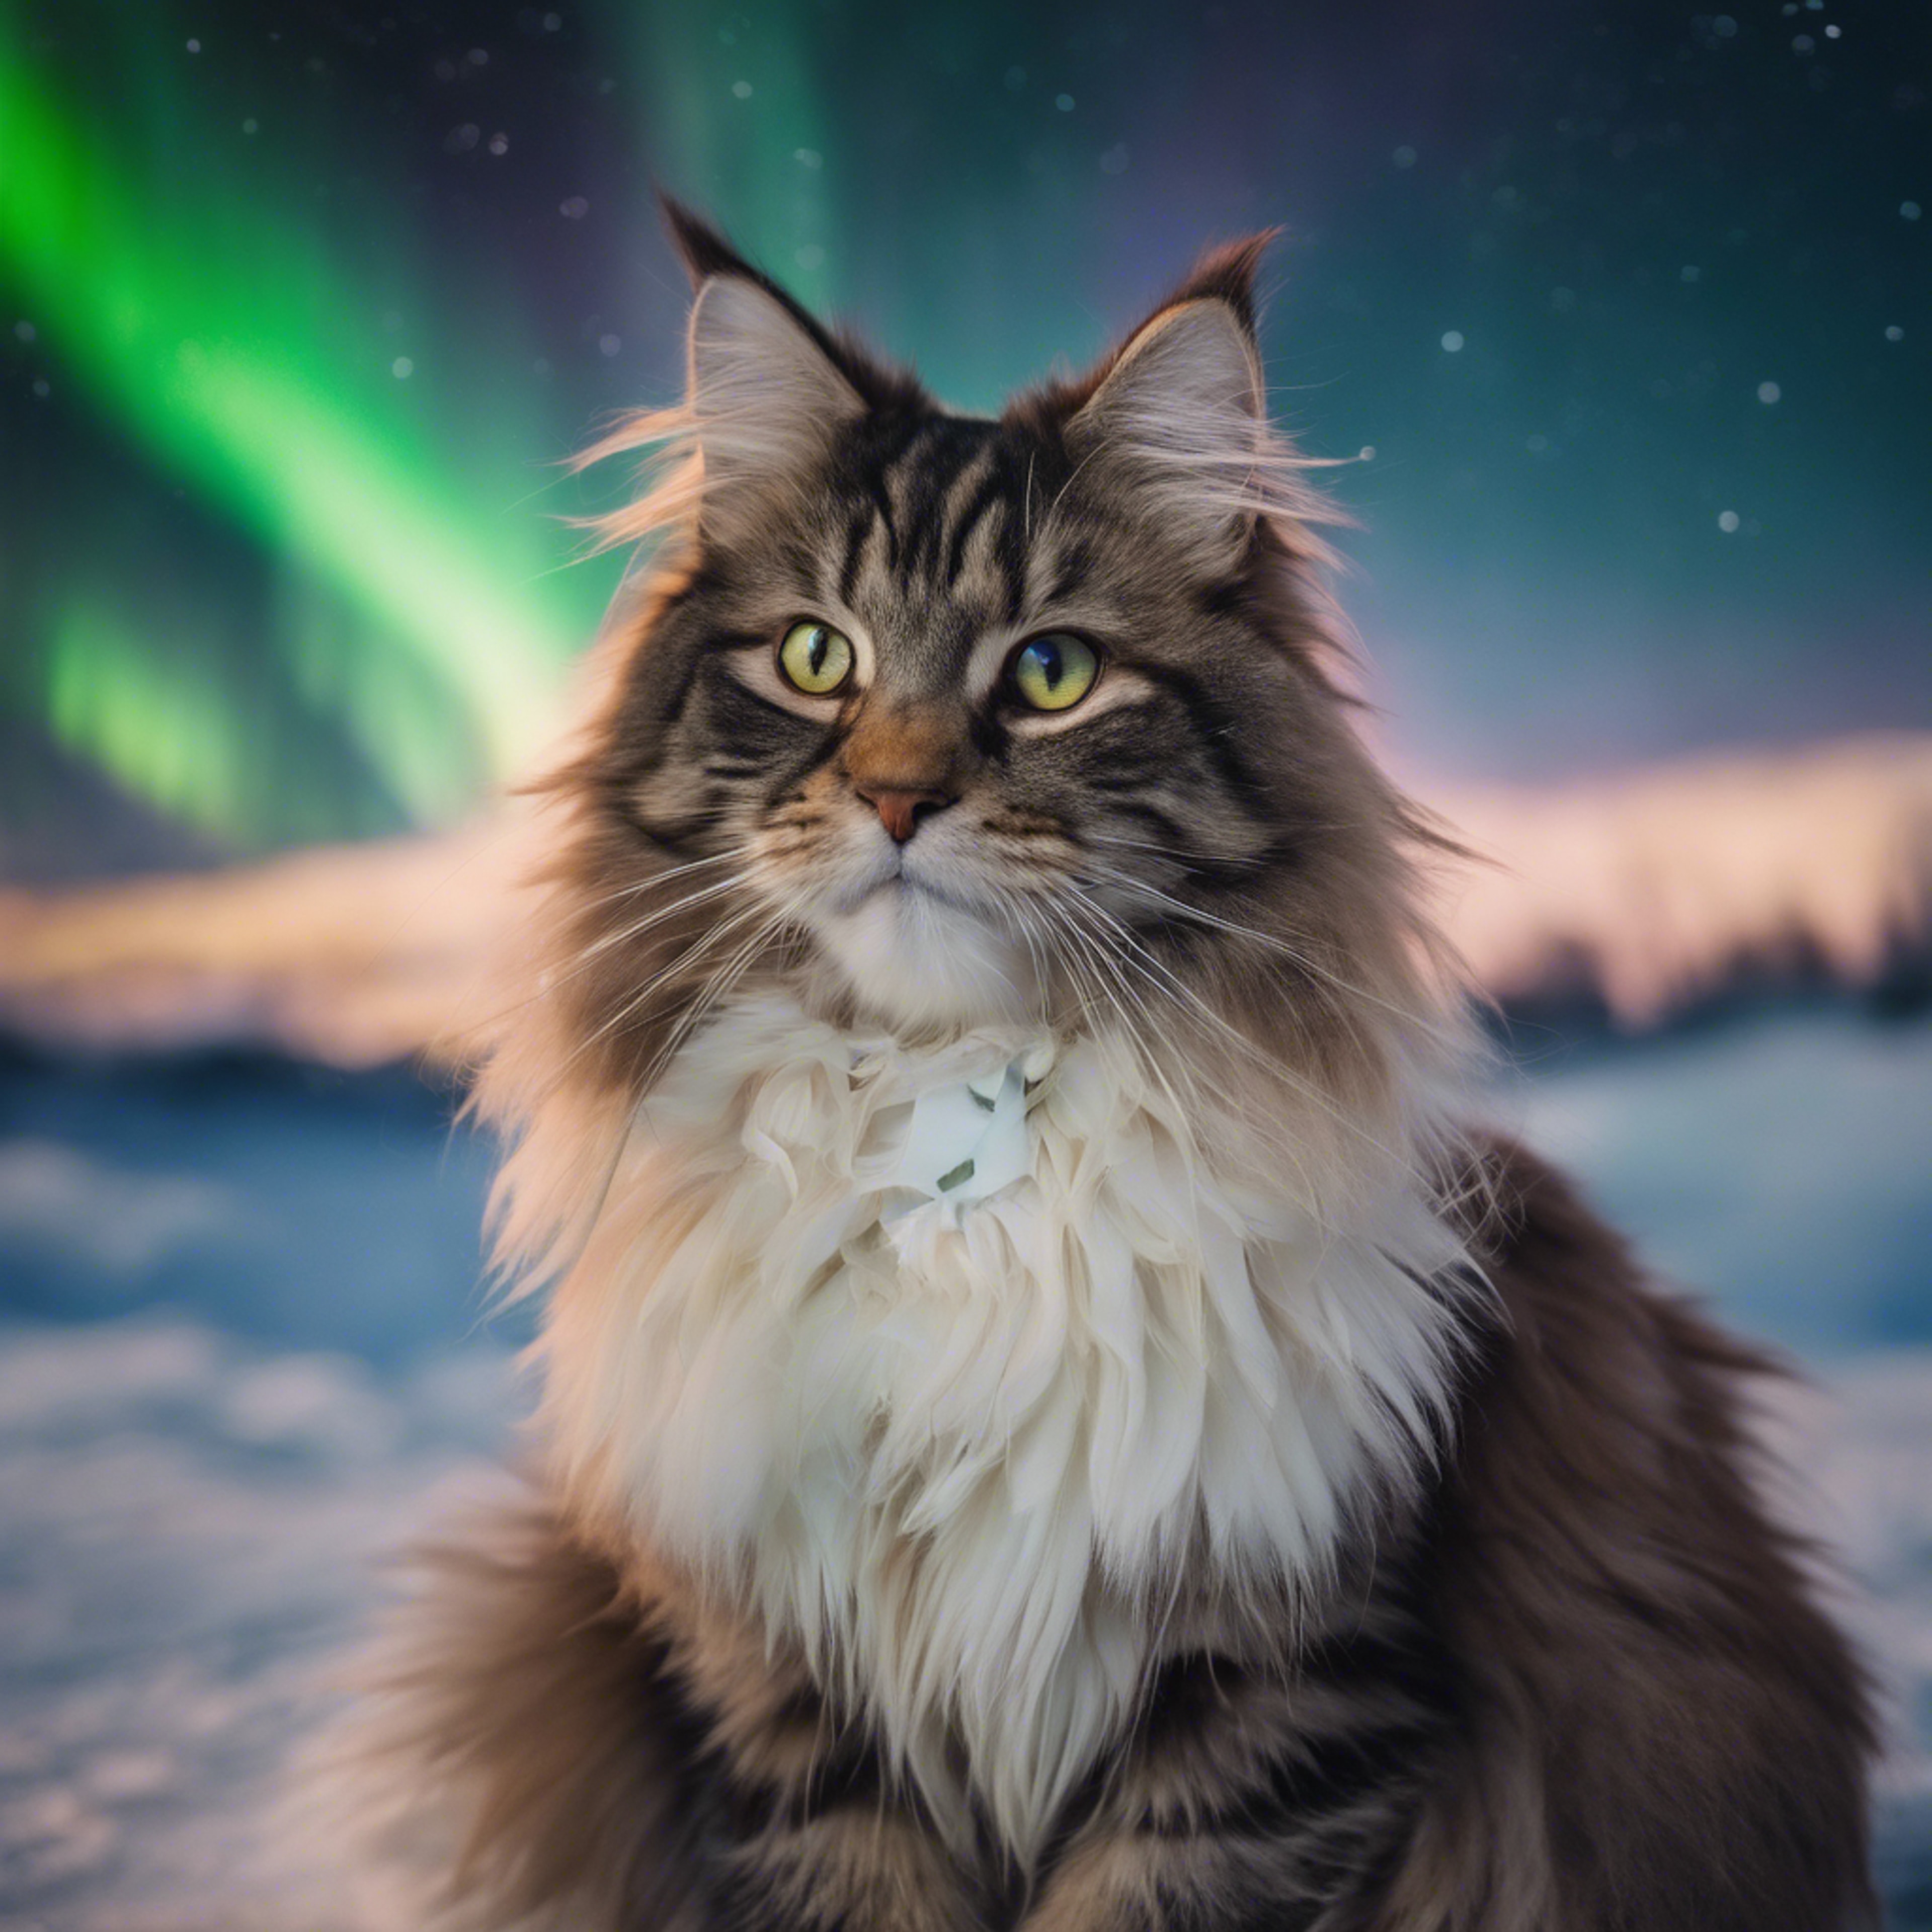 A Norwegian Forest cat sitting quietly under the aurora borealis, its eyes reflecting the dancing lights.壁紙[1b2a9174317e40c9a8f4]